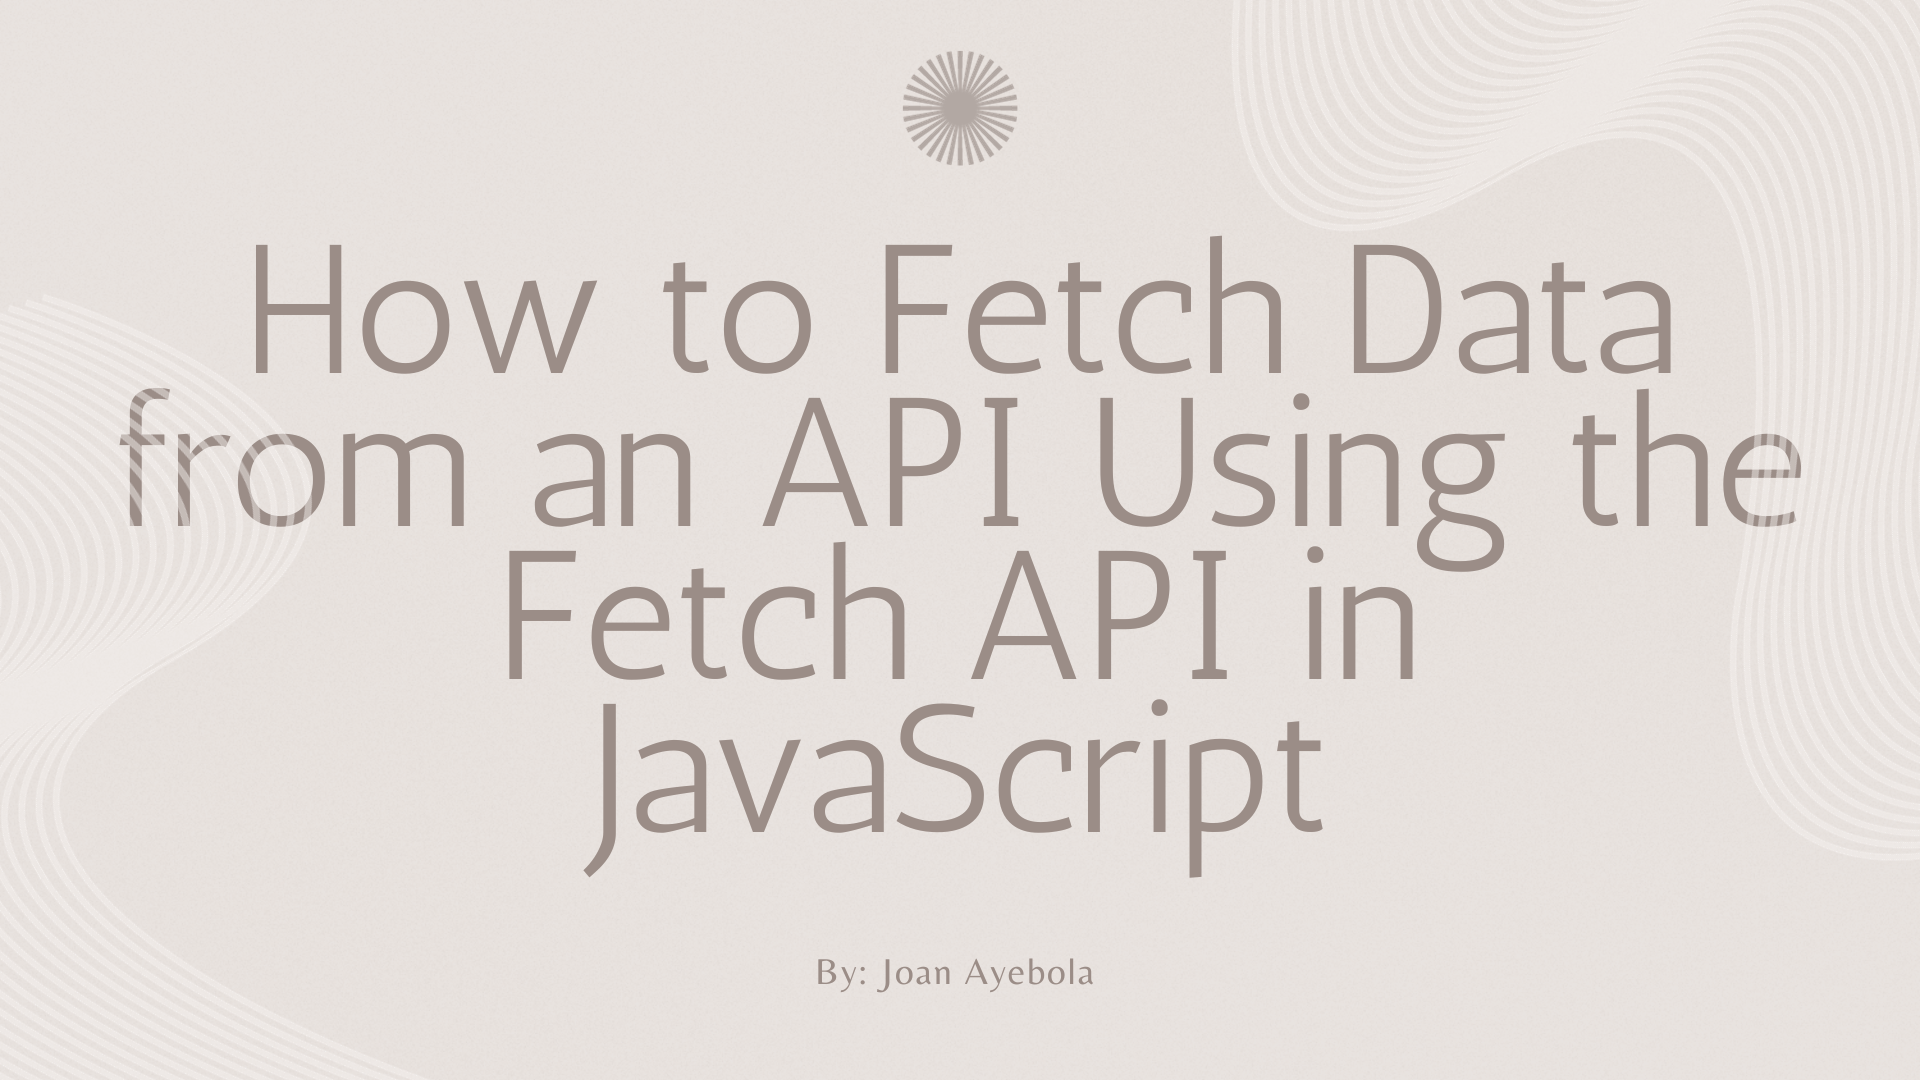 How to Fetch Data from an API Using the Fetch API in JavaScript